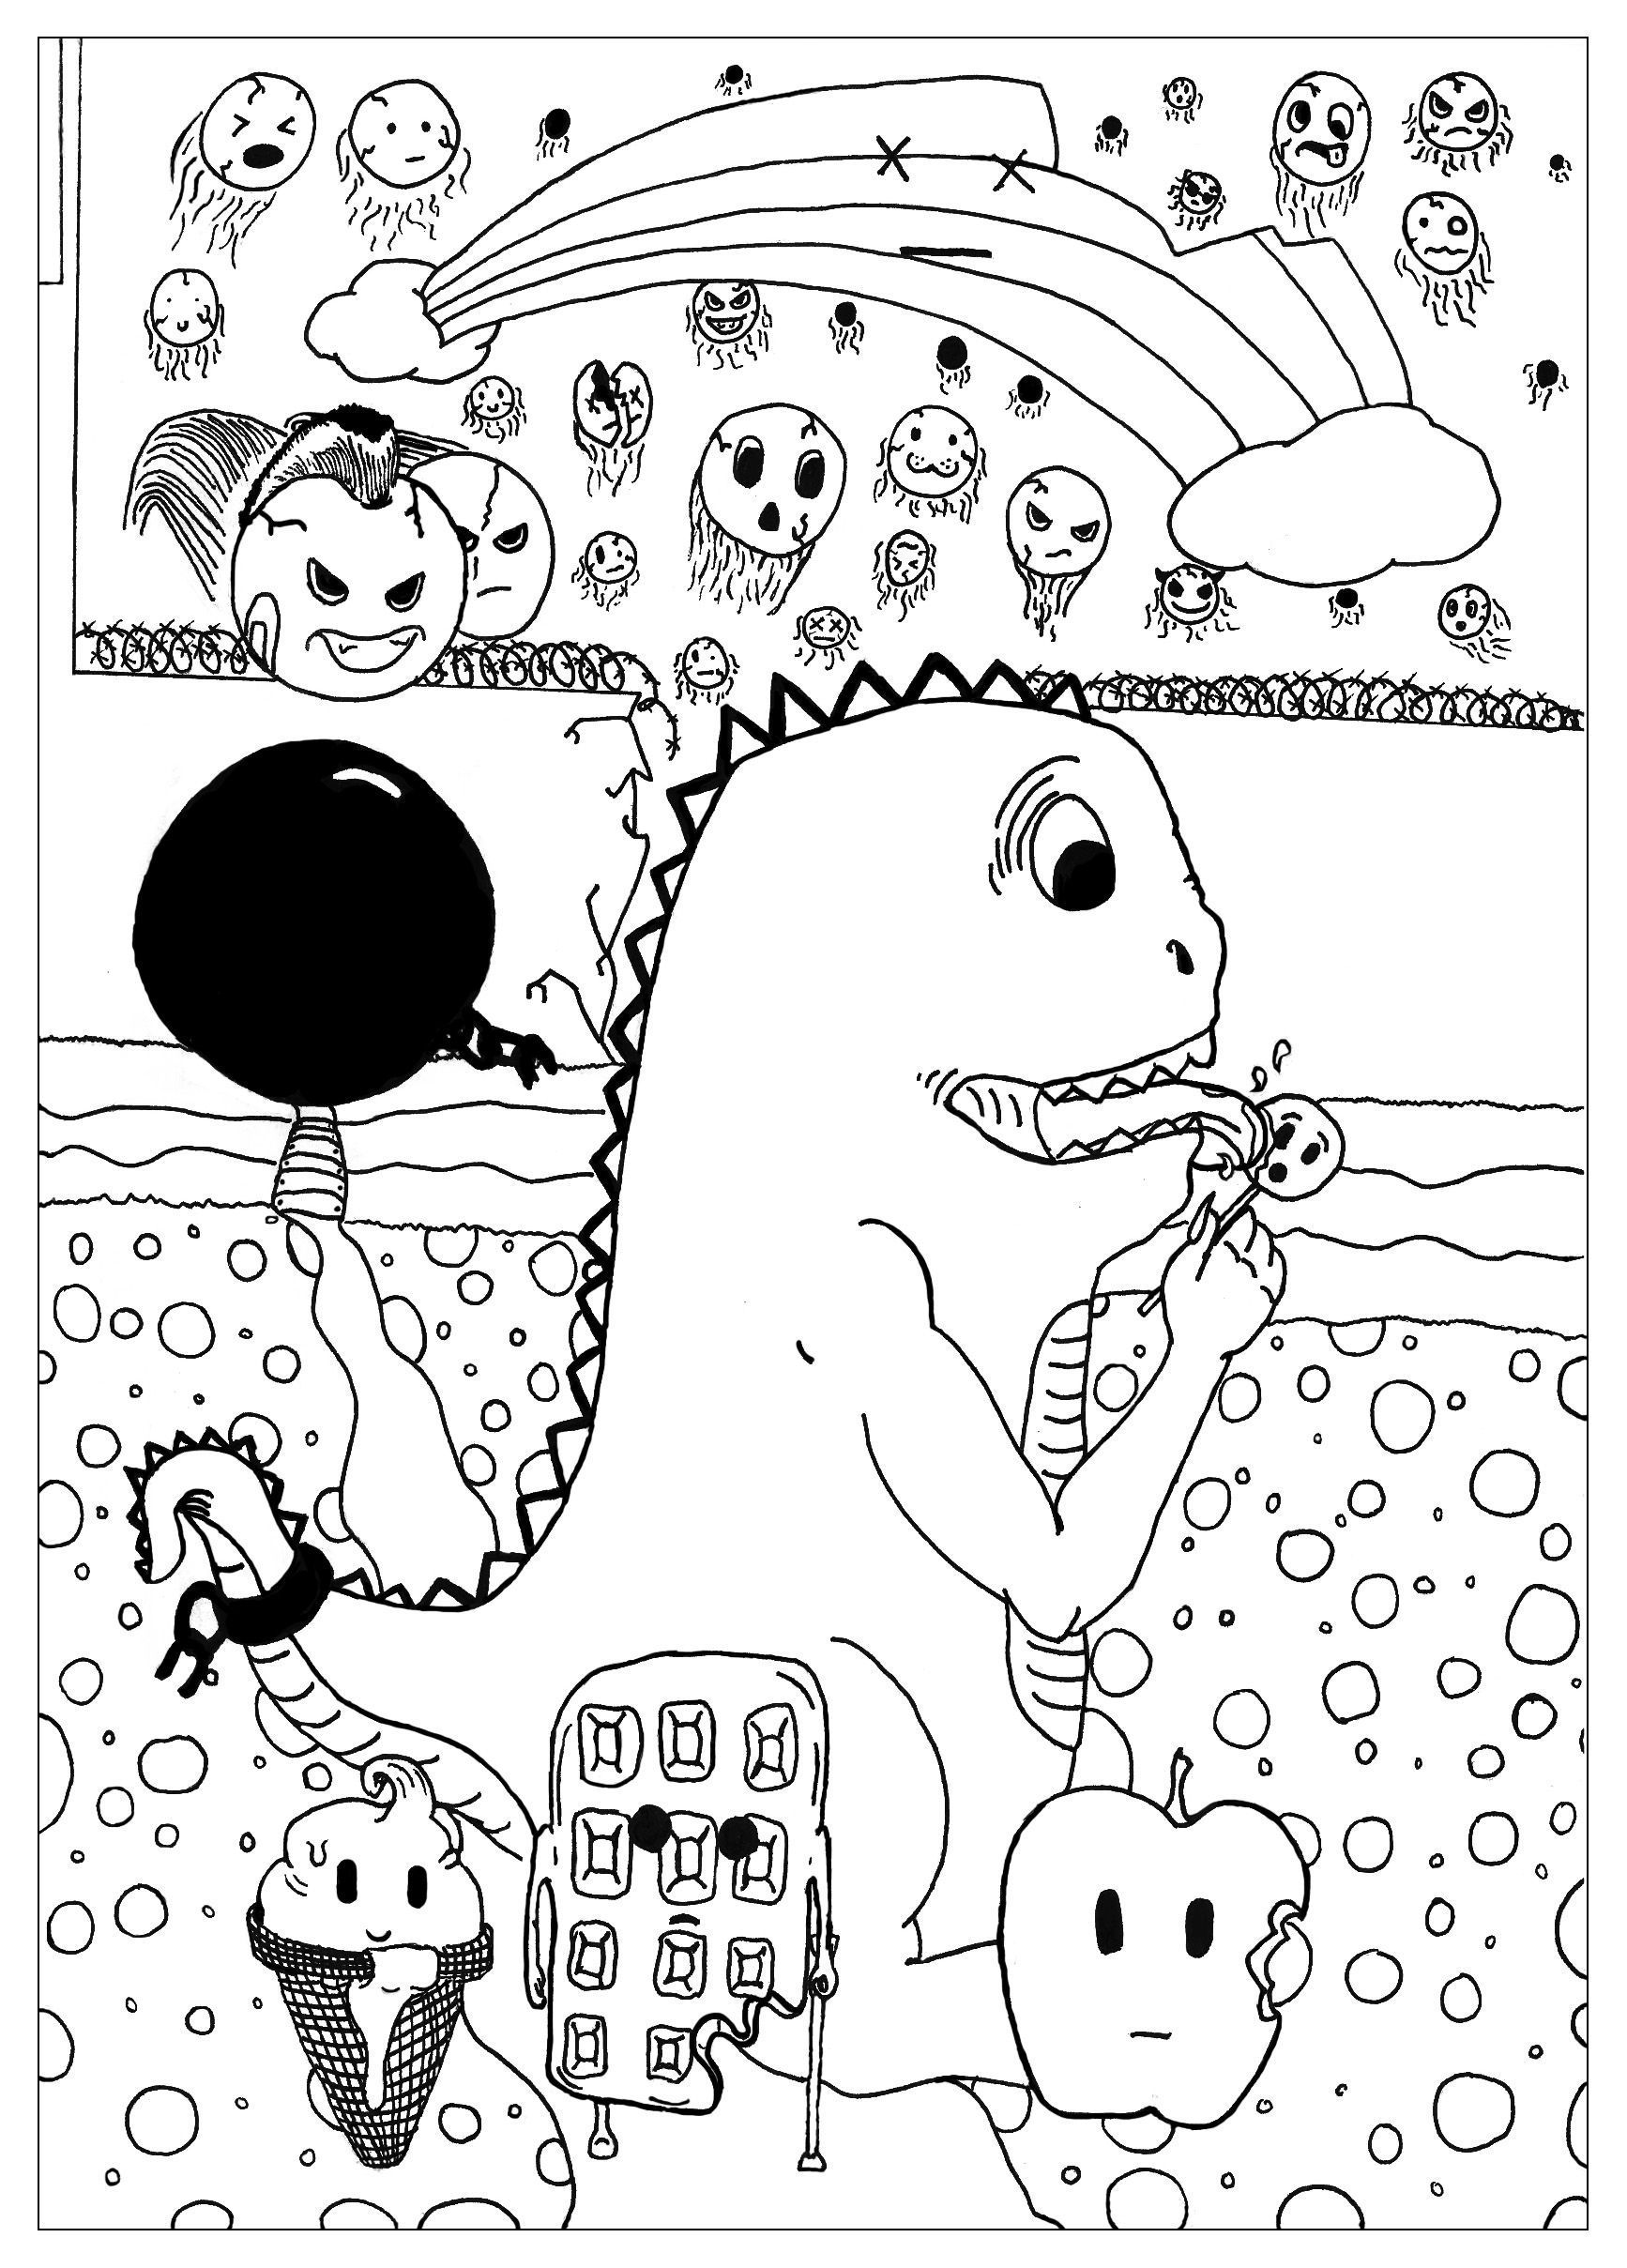 An original style for a monstrous Doodle. A dinosaur-like monster and its strange universe, drawn in the manner of Doodles, without any draft or pre-planned thinking.And if you also color this drawing 'by instinct', as it was drawn?, Artist : Allan